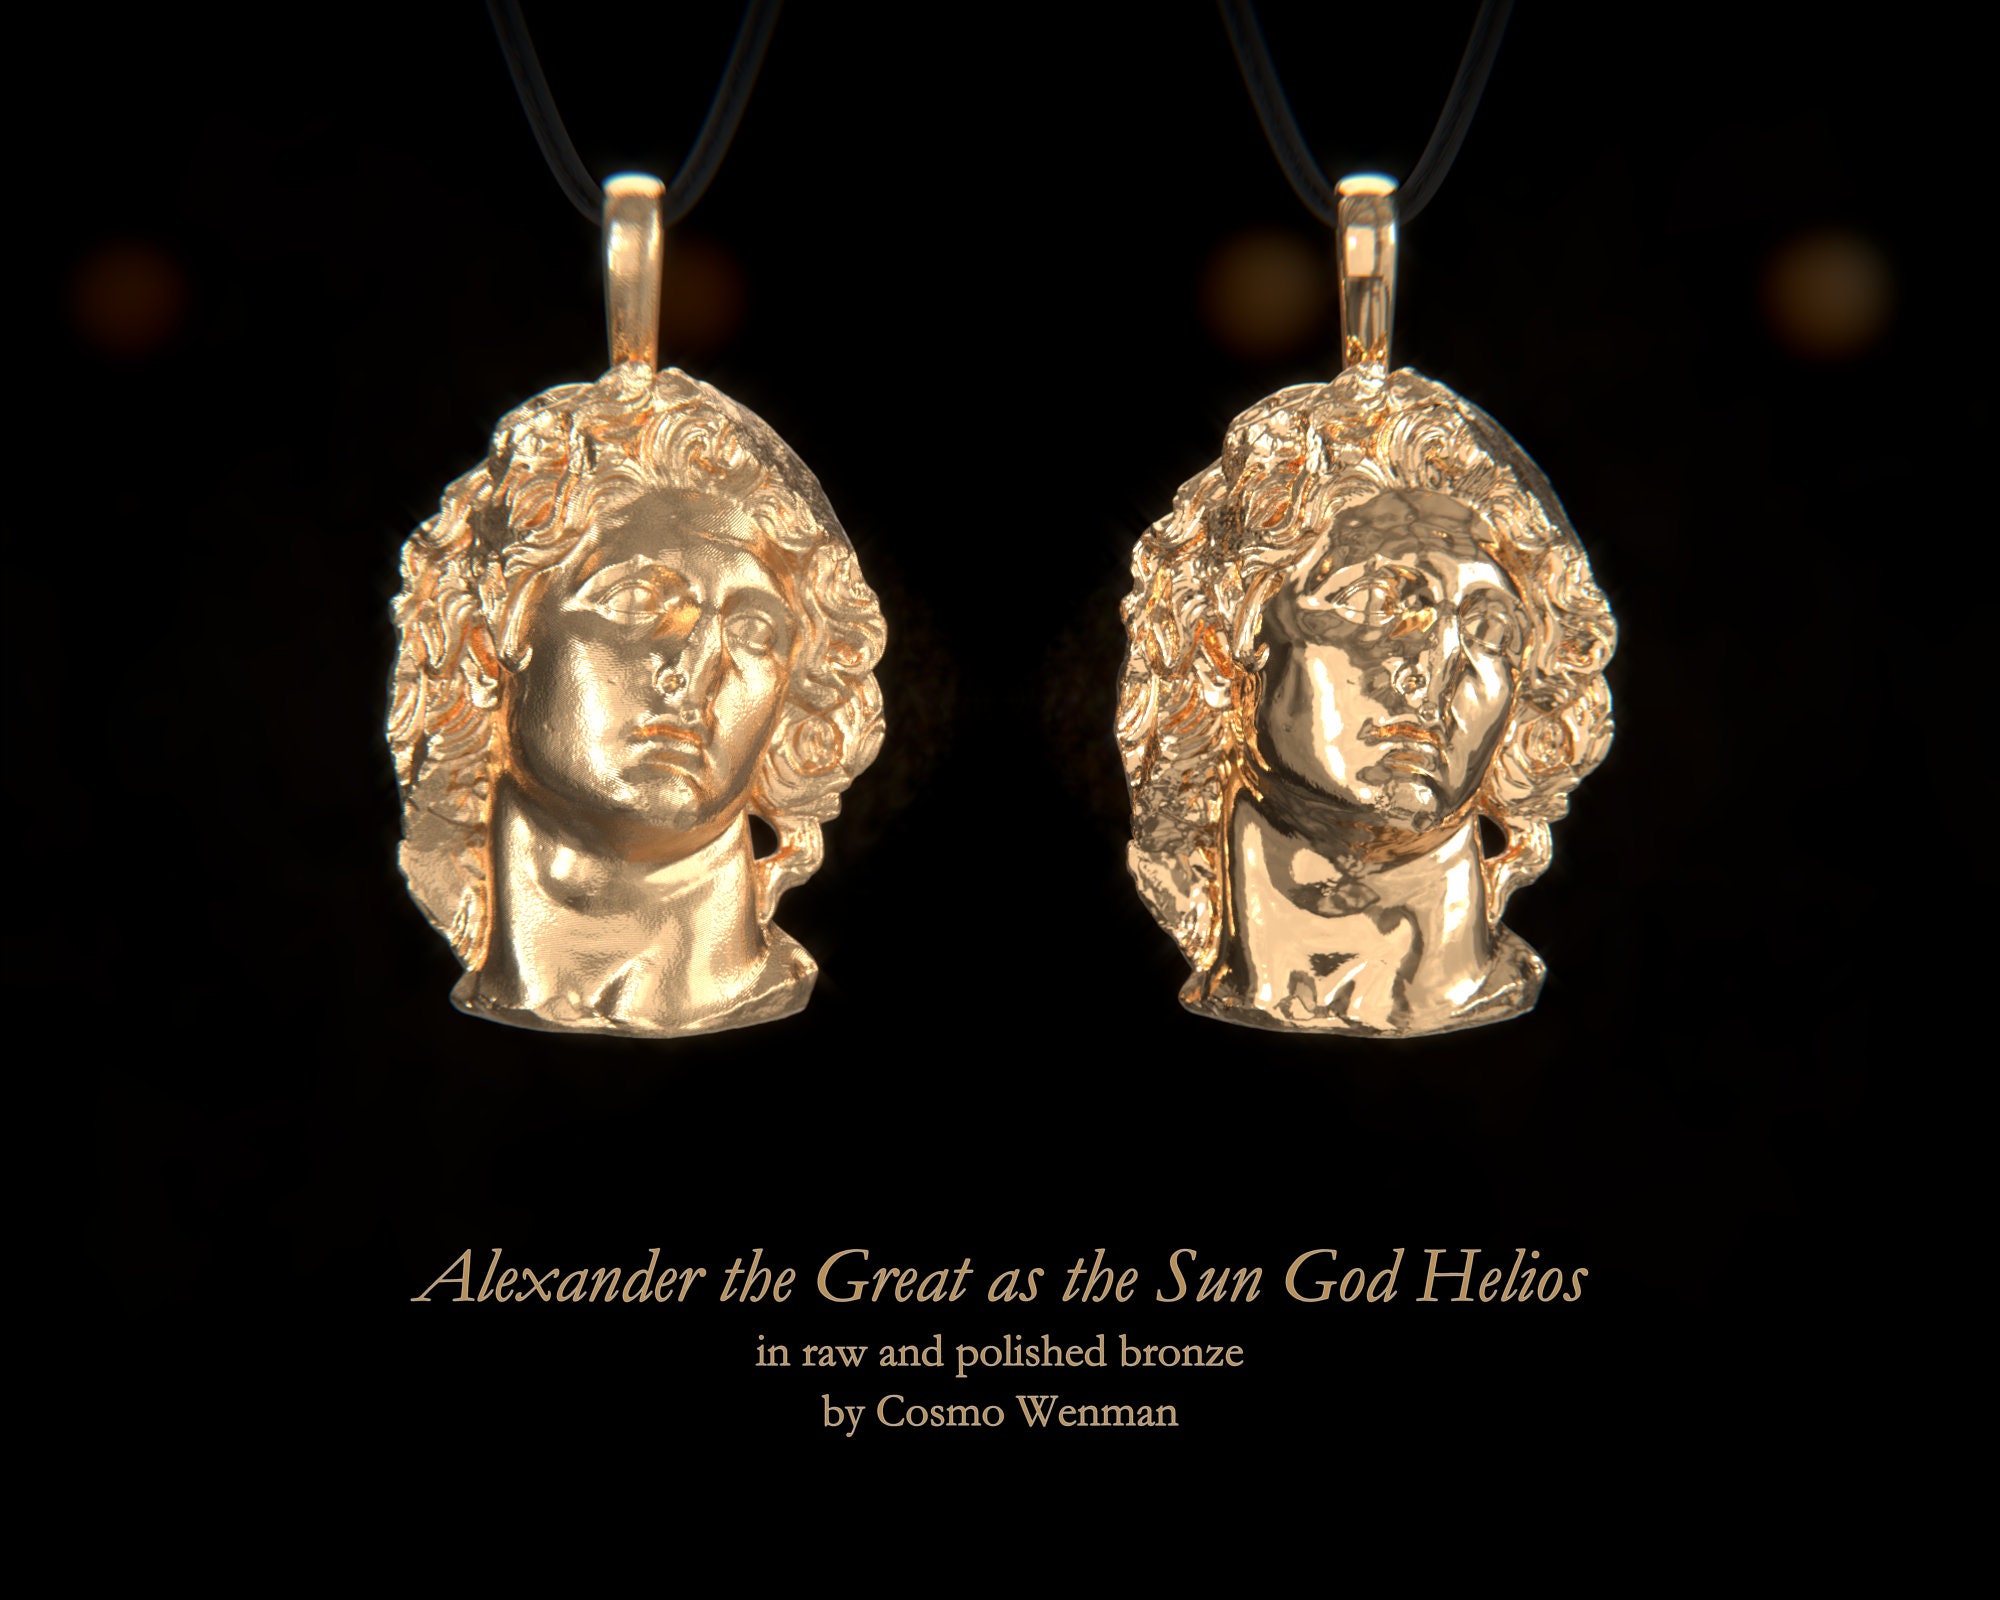 Cameo Gold Pagan Ancient Greek Artifact Jewelry Bronze Silver ALEXANDER THE GREAT as the Sun God Helios necklace pendant Platinum